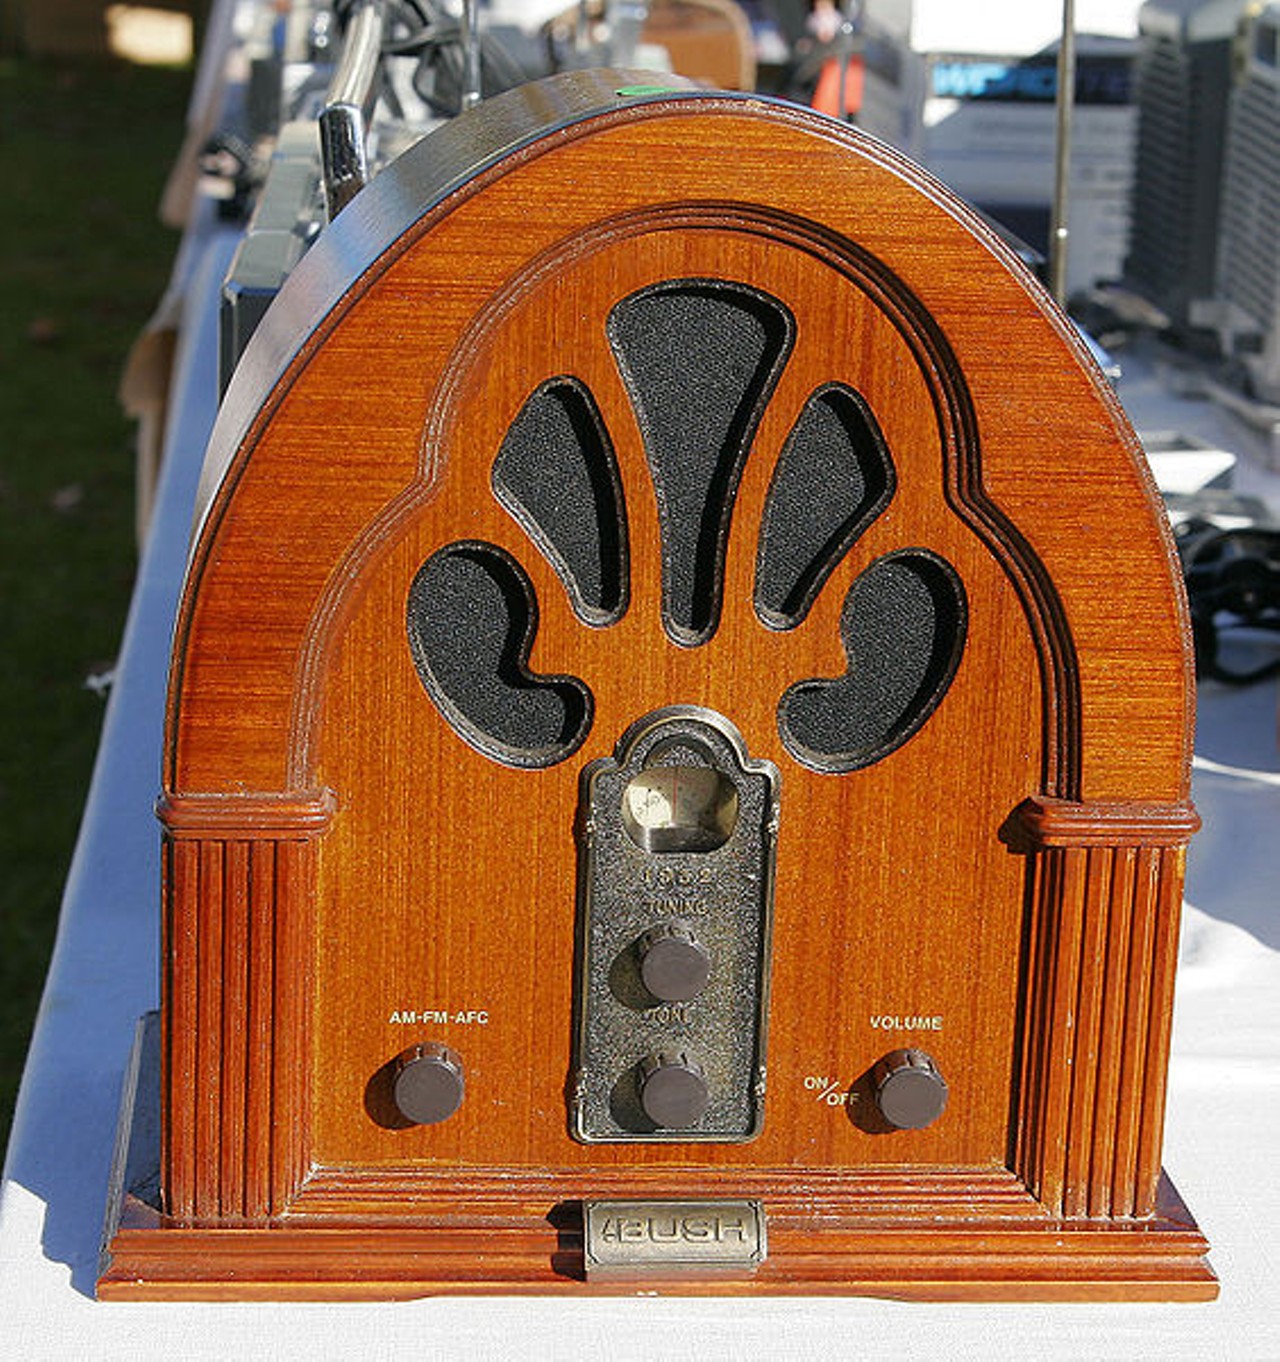 Willfully destroying your old radio is prohibited in Detroit.
Again, fair enough. Old radios are so pretty.